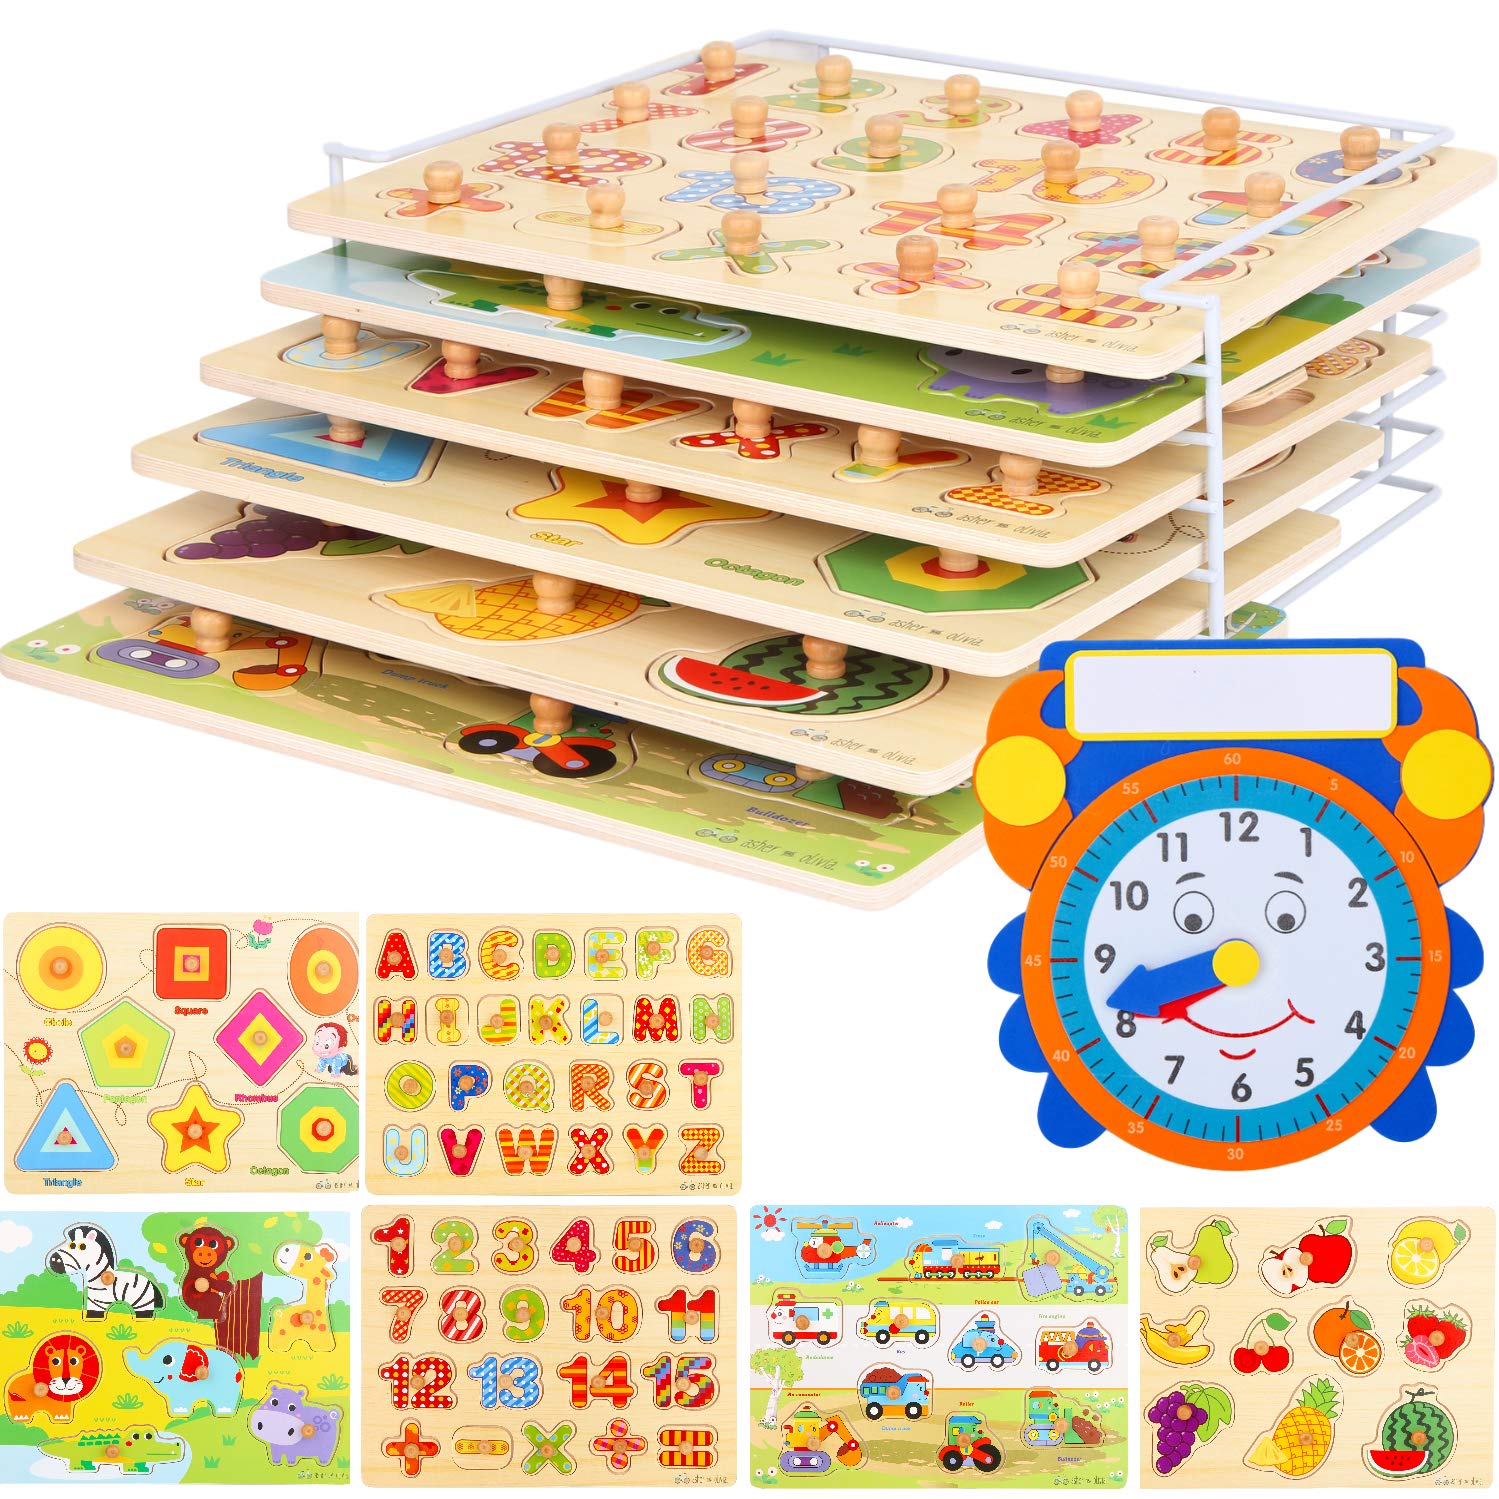 Wooden Toddler Puzzles and Rack Set - (6 Pack) Bundle with Storage Holder Rack and Learning Clock - Kids Educational Preschool Peg Puzzles for Children Babies Boys Girls - Alphabet Numbers Zoo Cars